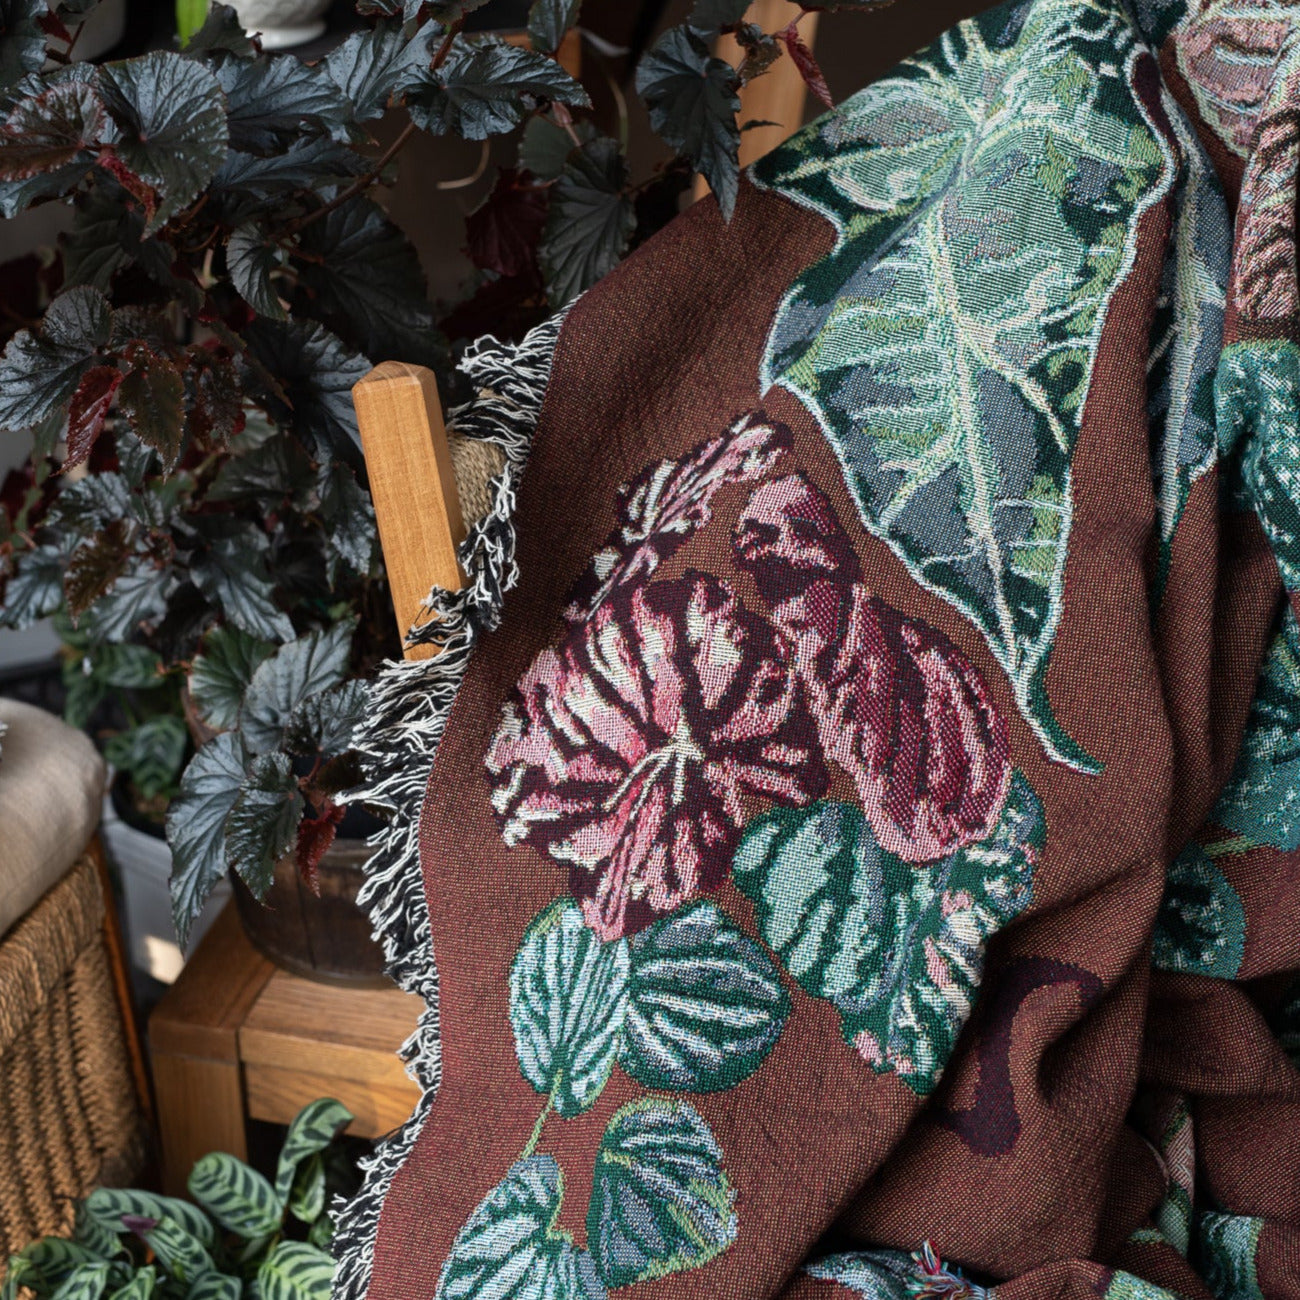 Woven throw blanket with fringe, featuring houseplants in stunning detail